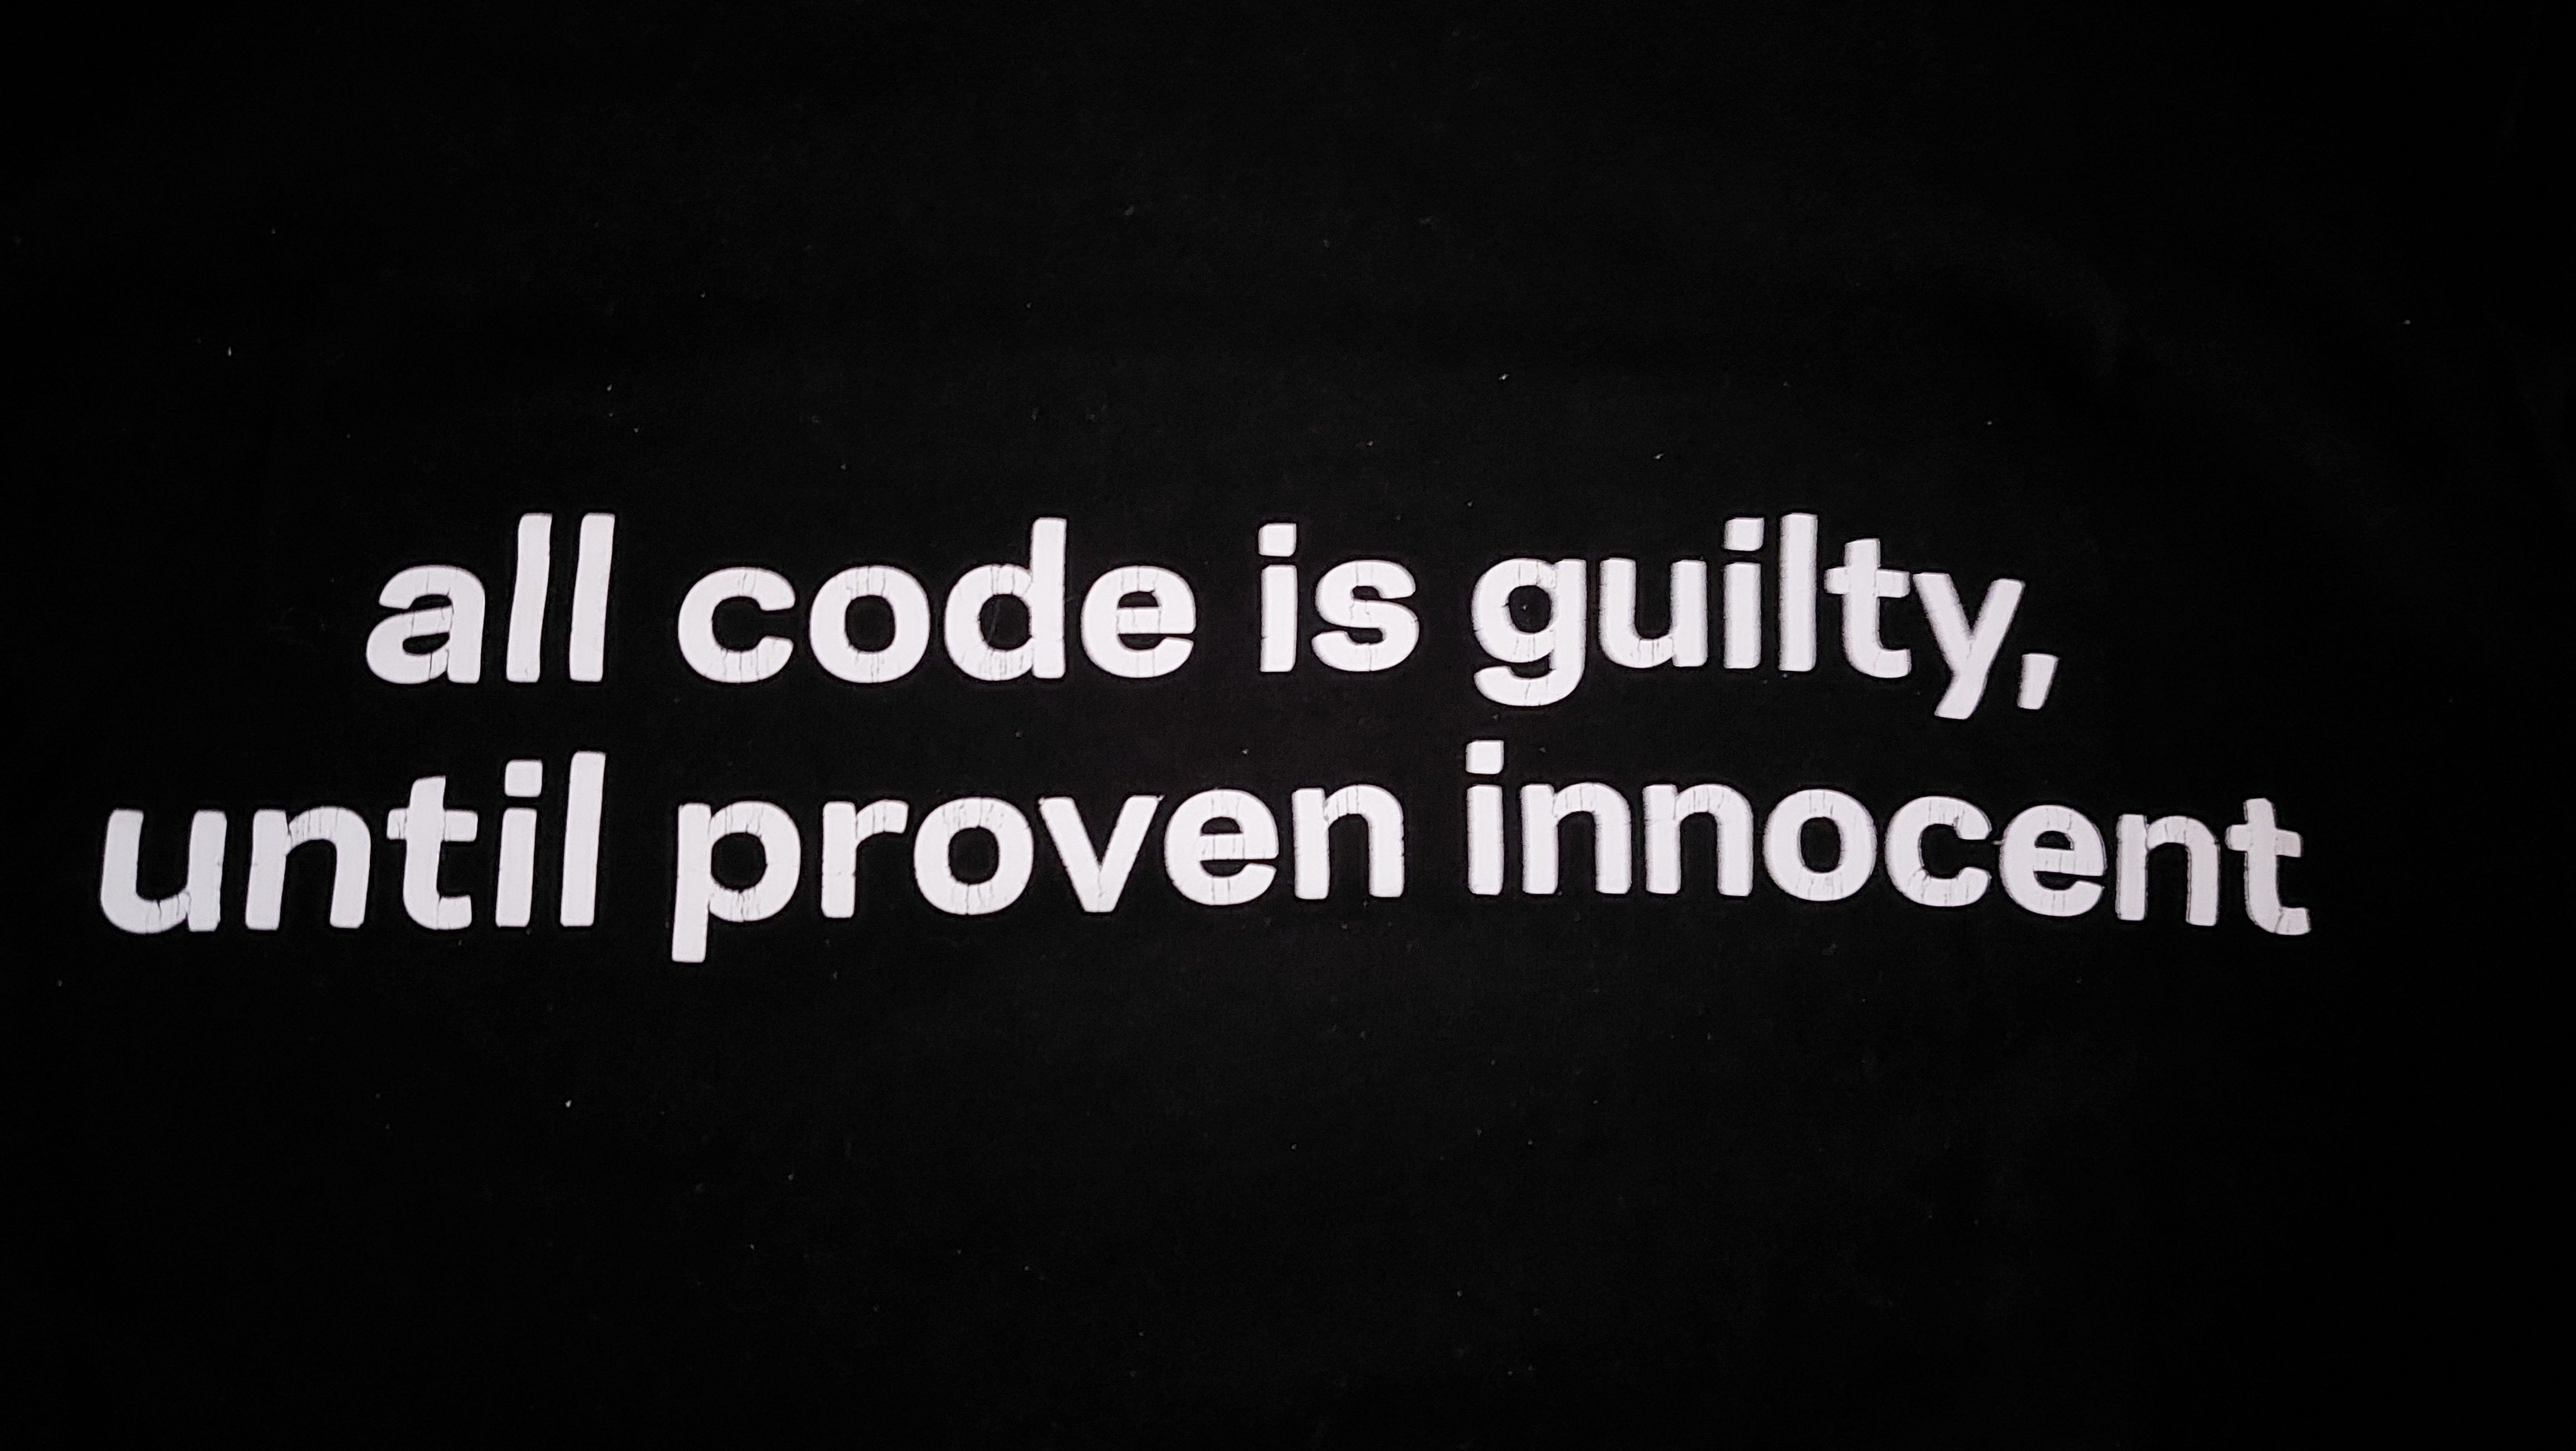 All code is guilty until proven innocent